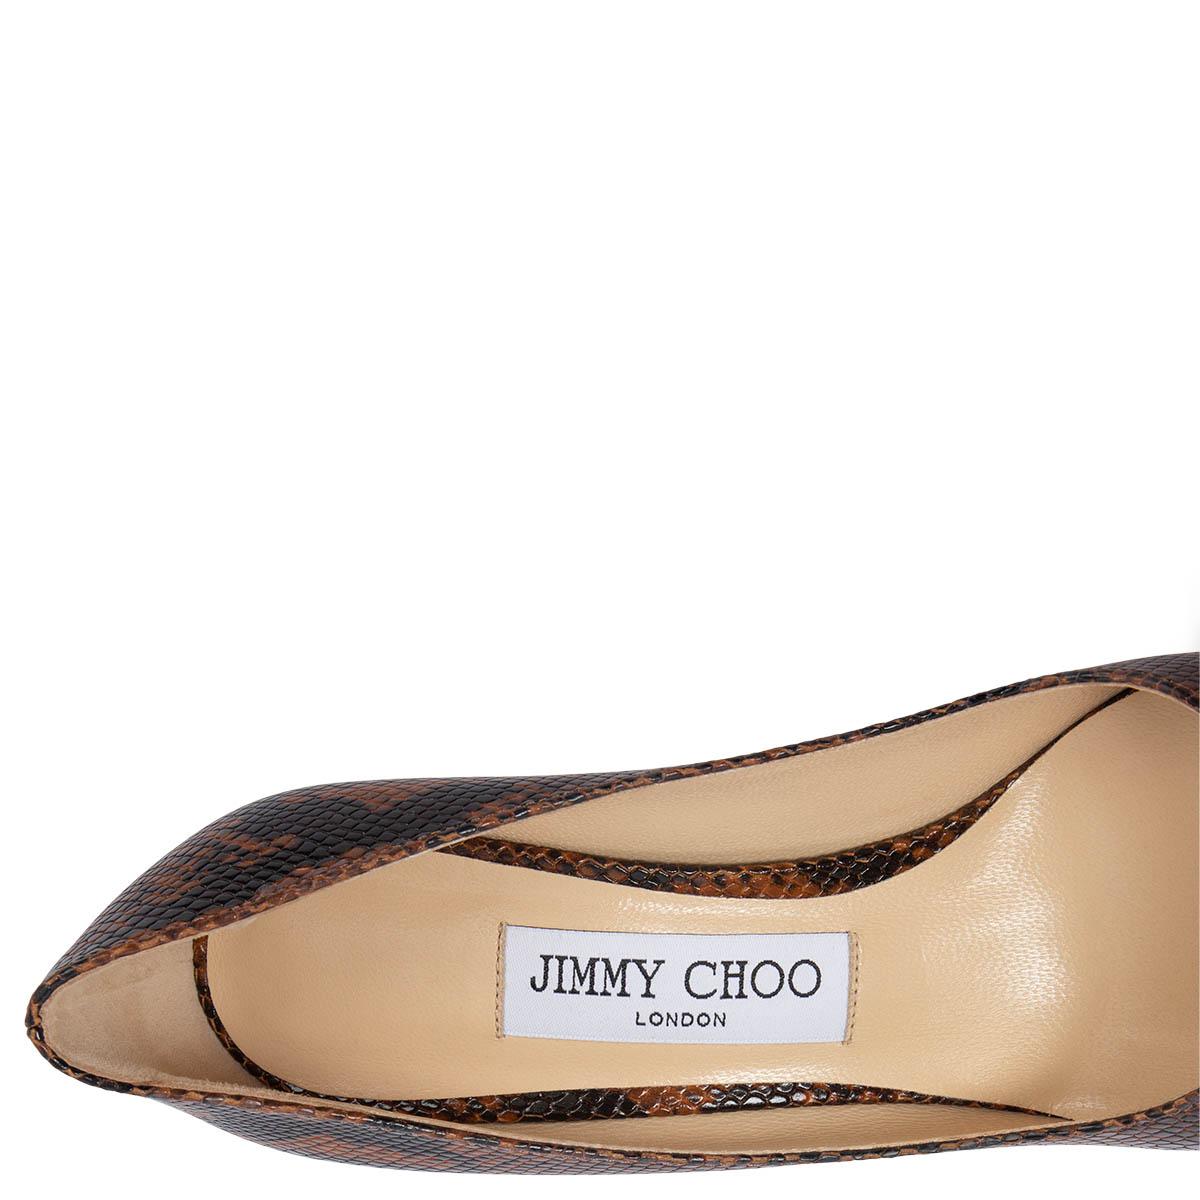 JIMMY CHOO brown FAUX SNAKE ROMY 85 Pointed Toe Pumps Pumps Shoes 36.5 For Sale 2